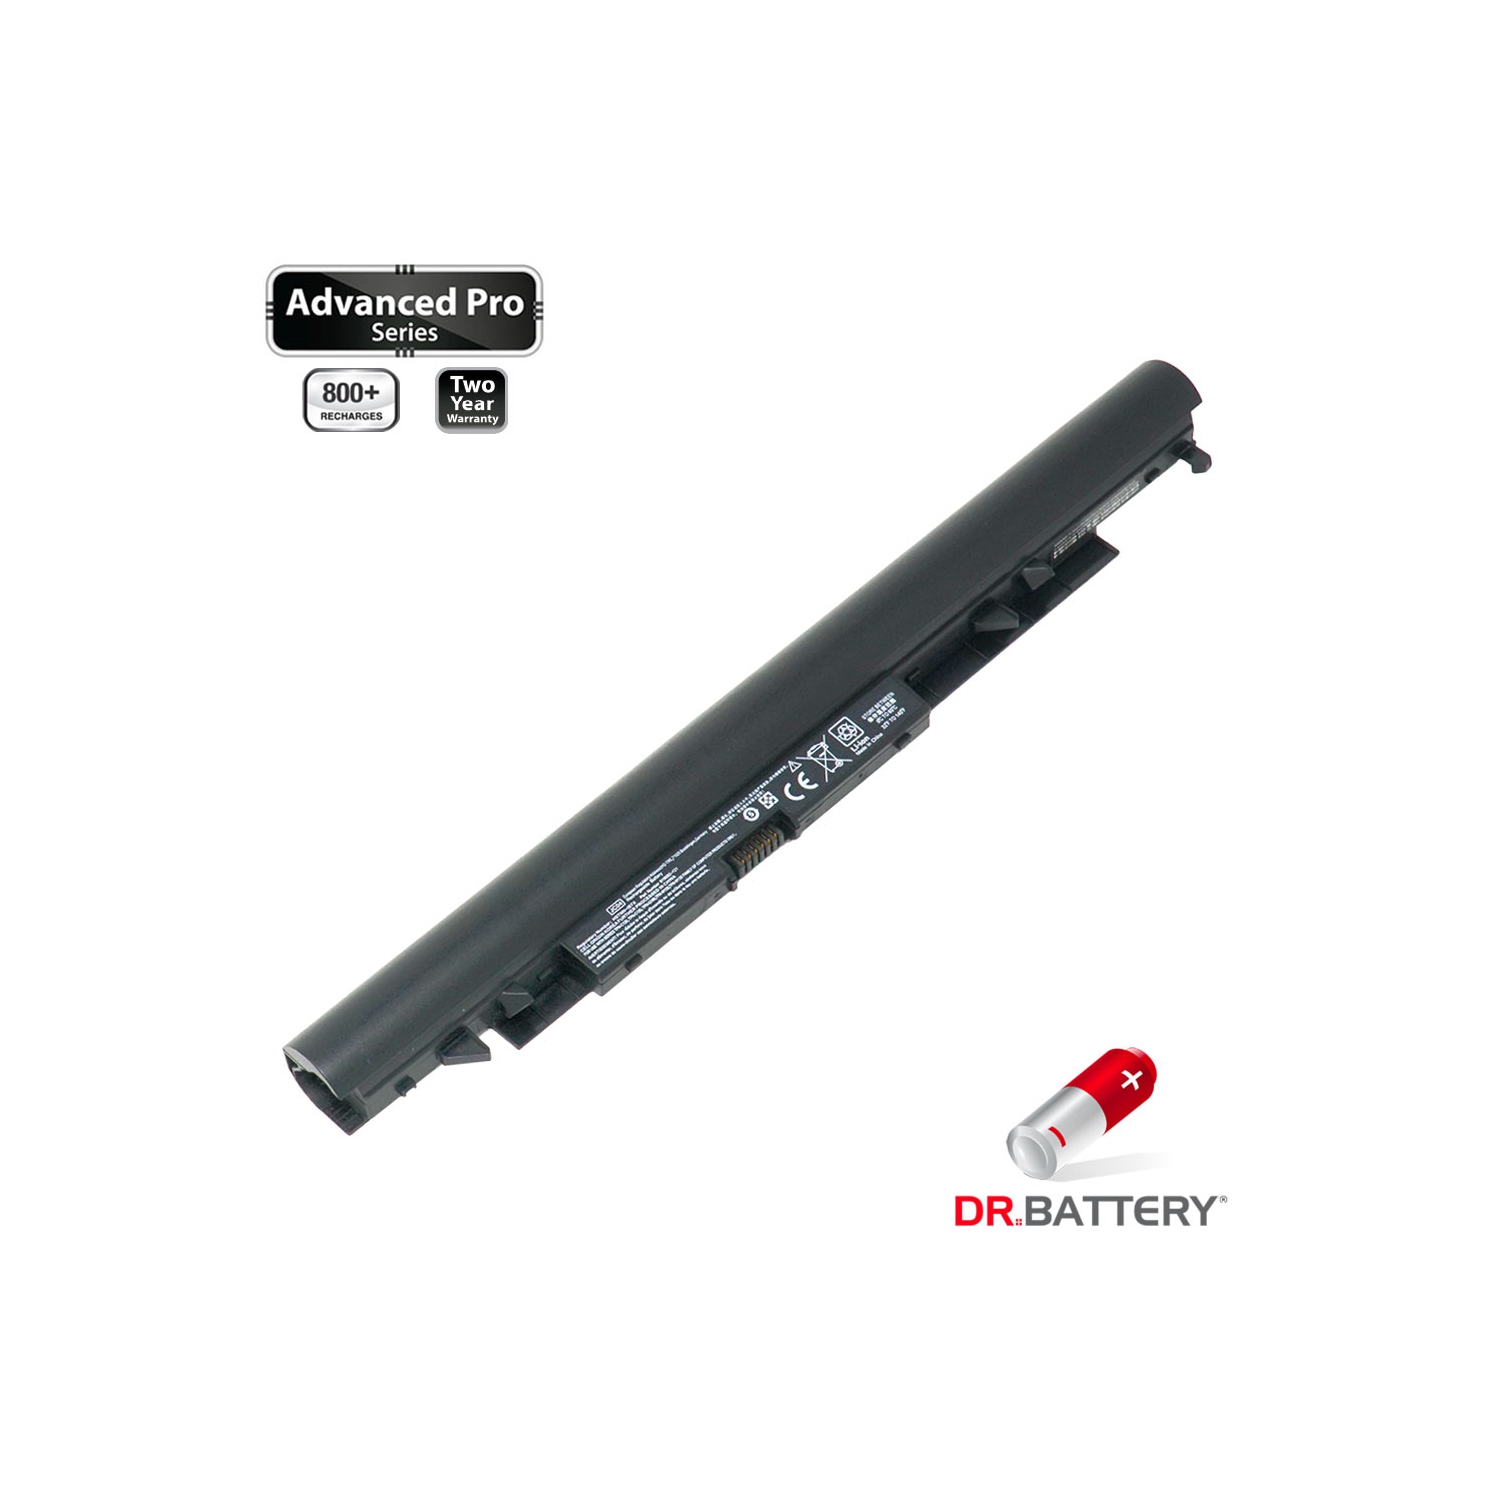 Dr. Battery - Samsung SDI Cells for HP 240 G6 2PC92PA / 245 G5 / 245 G5 Y0T72PA / 919682-421 / 919682-831 - Free Shipping